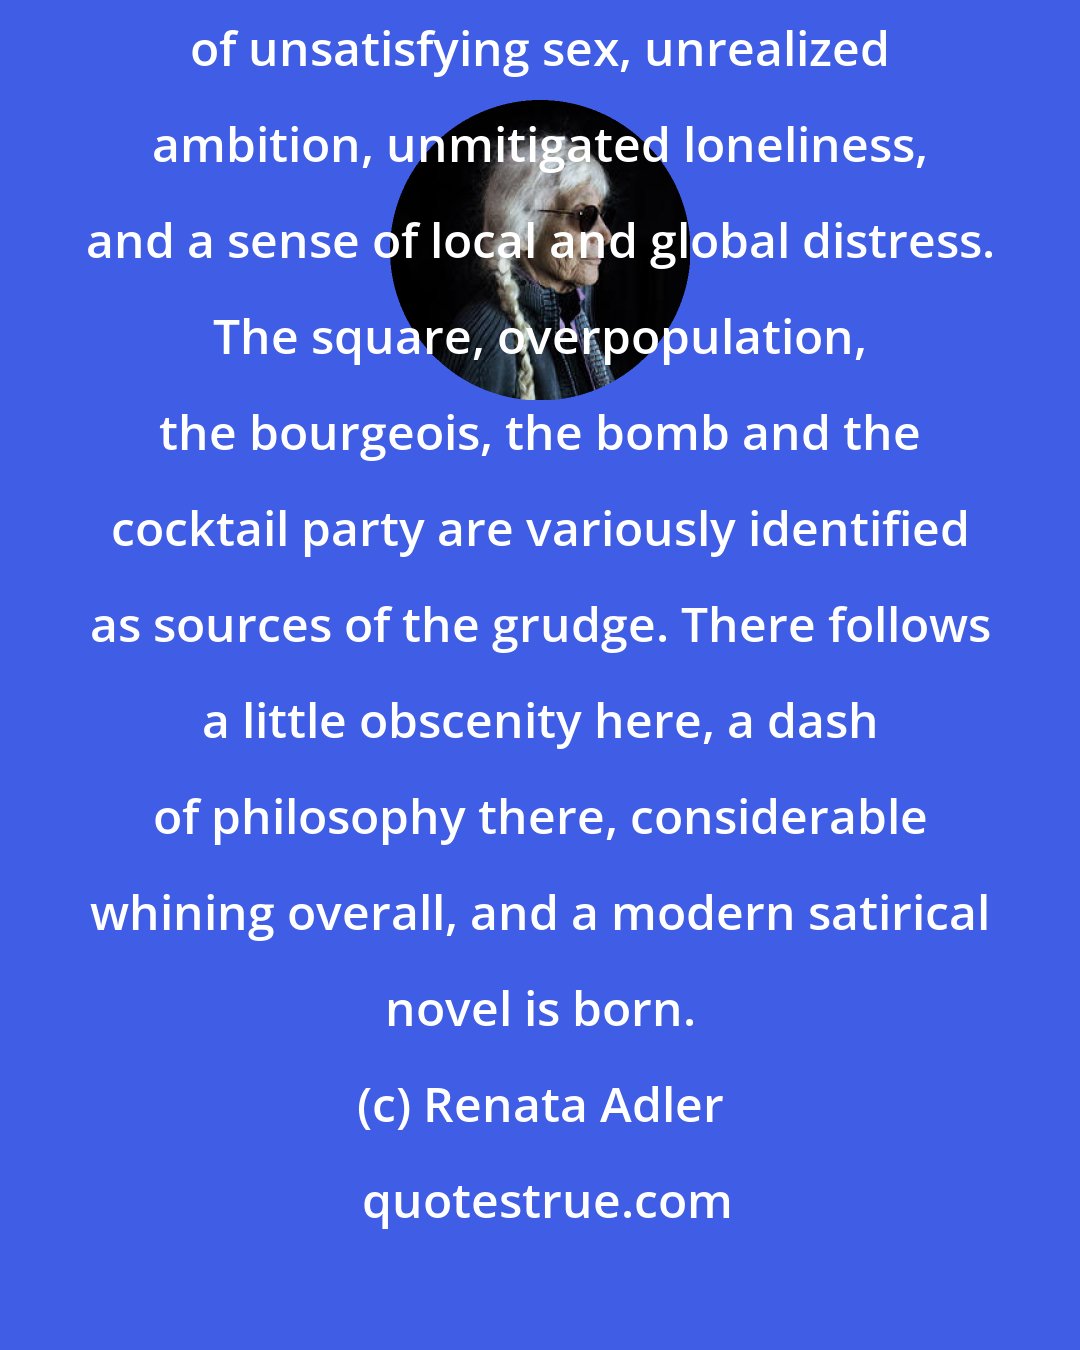 Renata Adler: The writer has a grudge against society, which he documents with accounts of unsatisfying sex, unrealized ambition, unmitigated loneliness, and a sense of local and global distress. The square, overpopulation, the bourgeois, the bomb and the cocktail party are variously identified as sources of the grudge. There follows a little obscenity here, a dash of philosophy there, considerable whining overall, and a modern satirical novel is born.